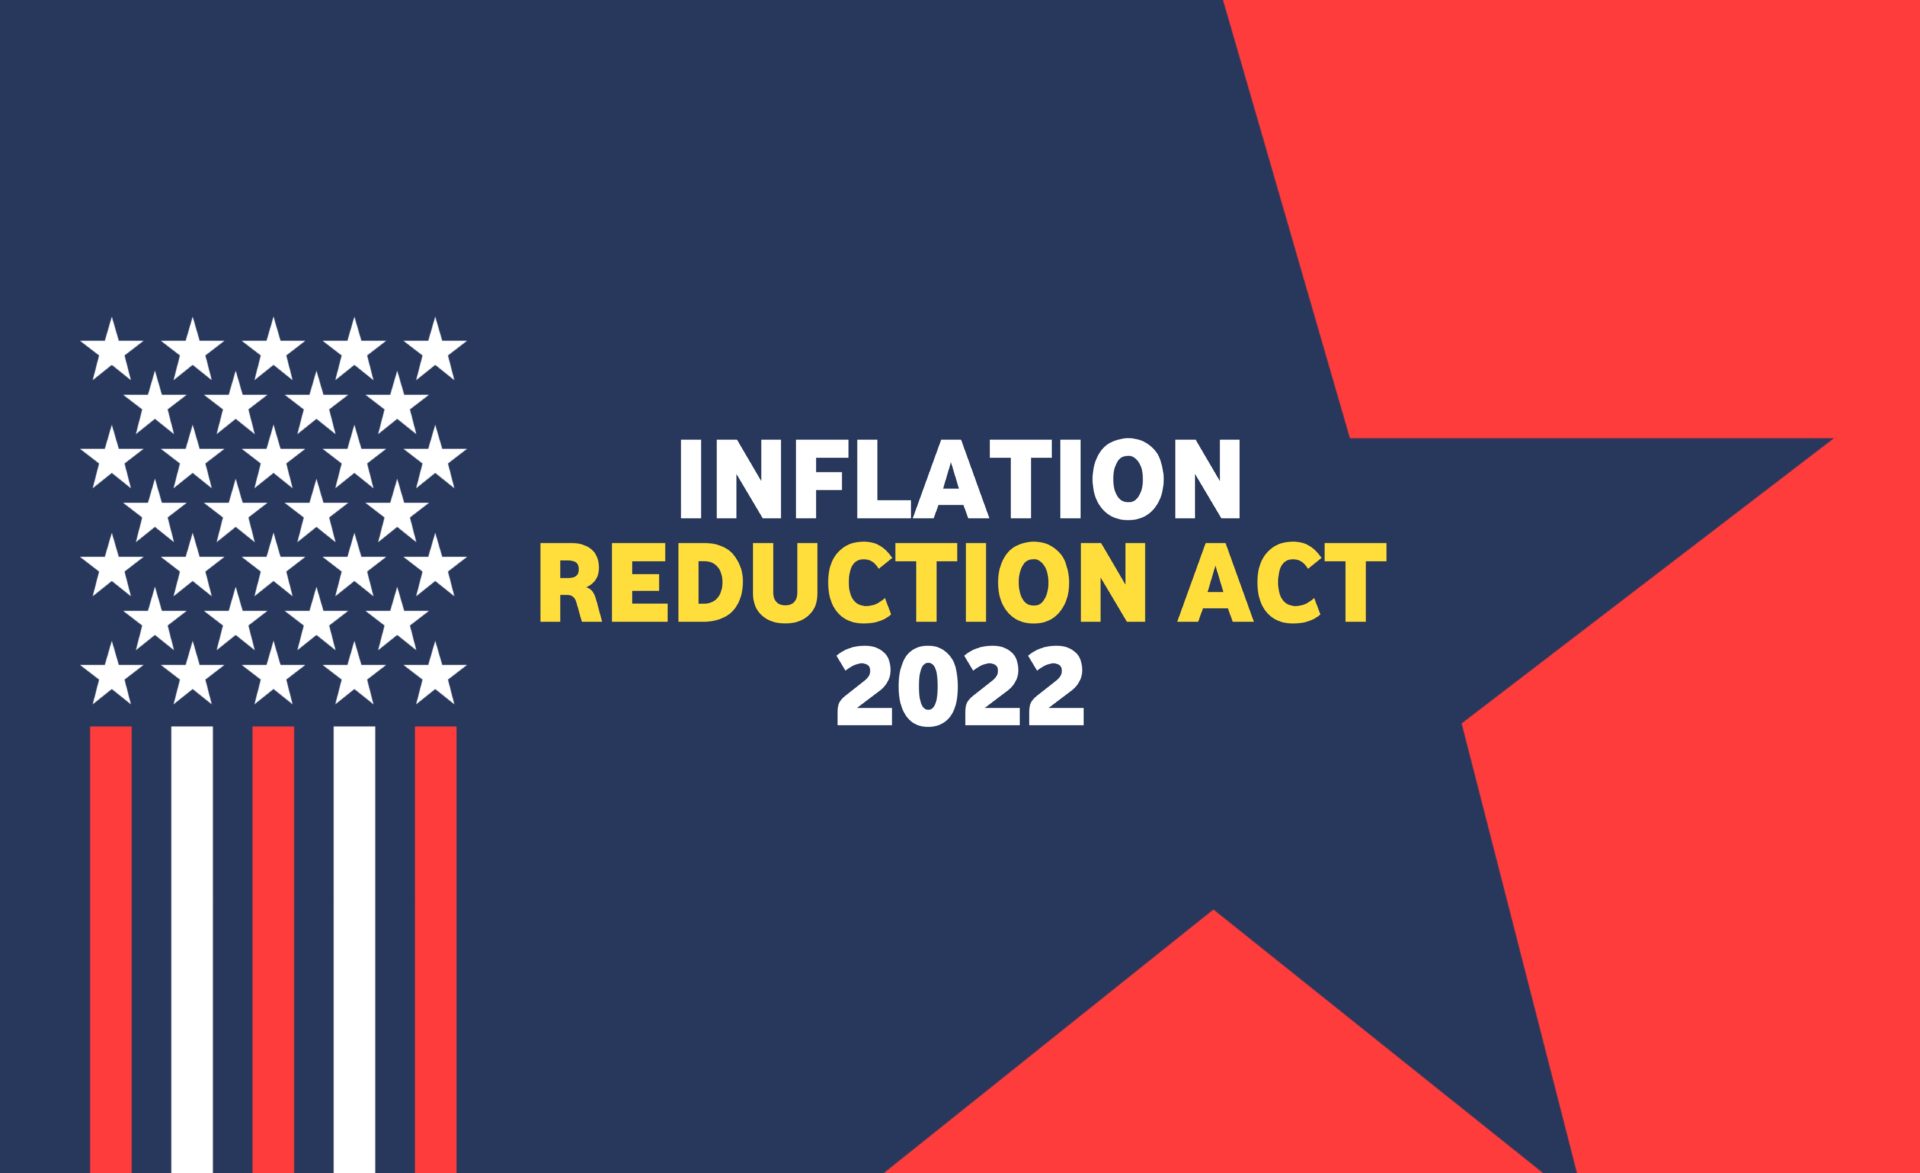 inflation-reduction-act-key-takeaways-entegrity-energy-partners